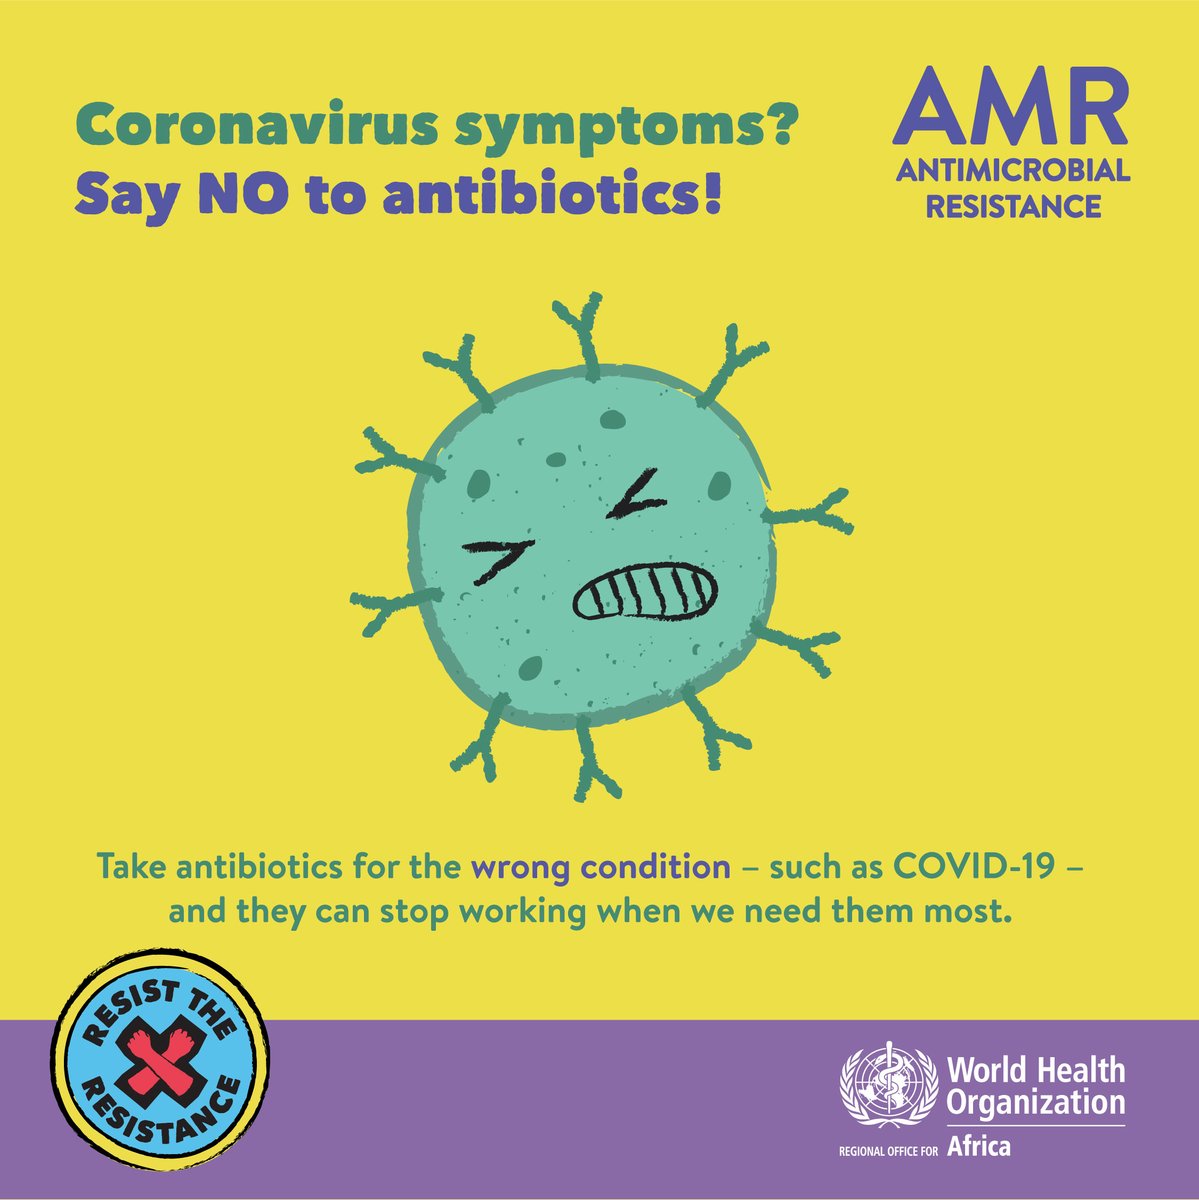 Taking antibiotics when you don’t need them means they can stop working for you when you need them most. 

✅ Only take antimicrobial medicines when prescribed ➡️ afro.who.int/ResistAMR